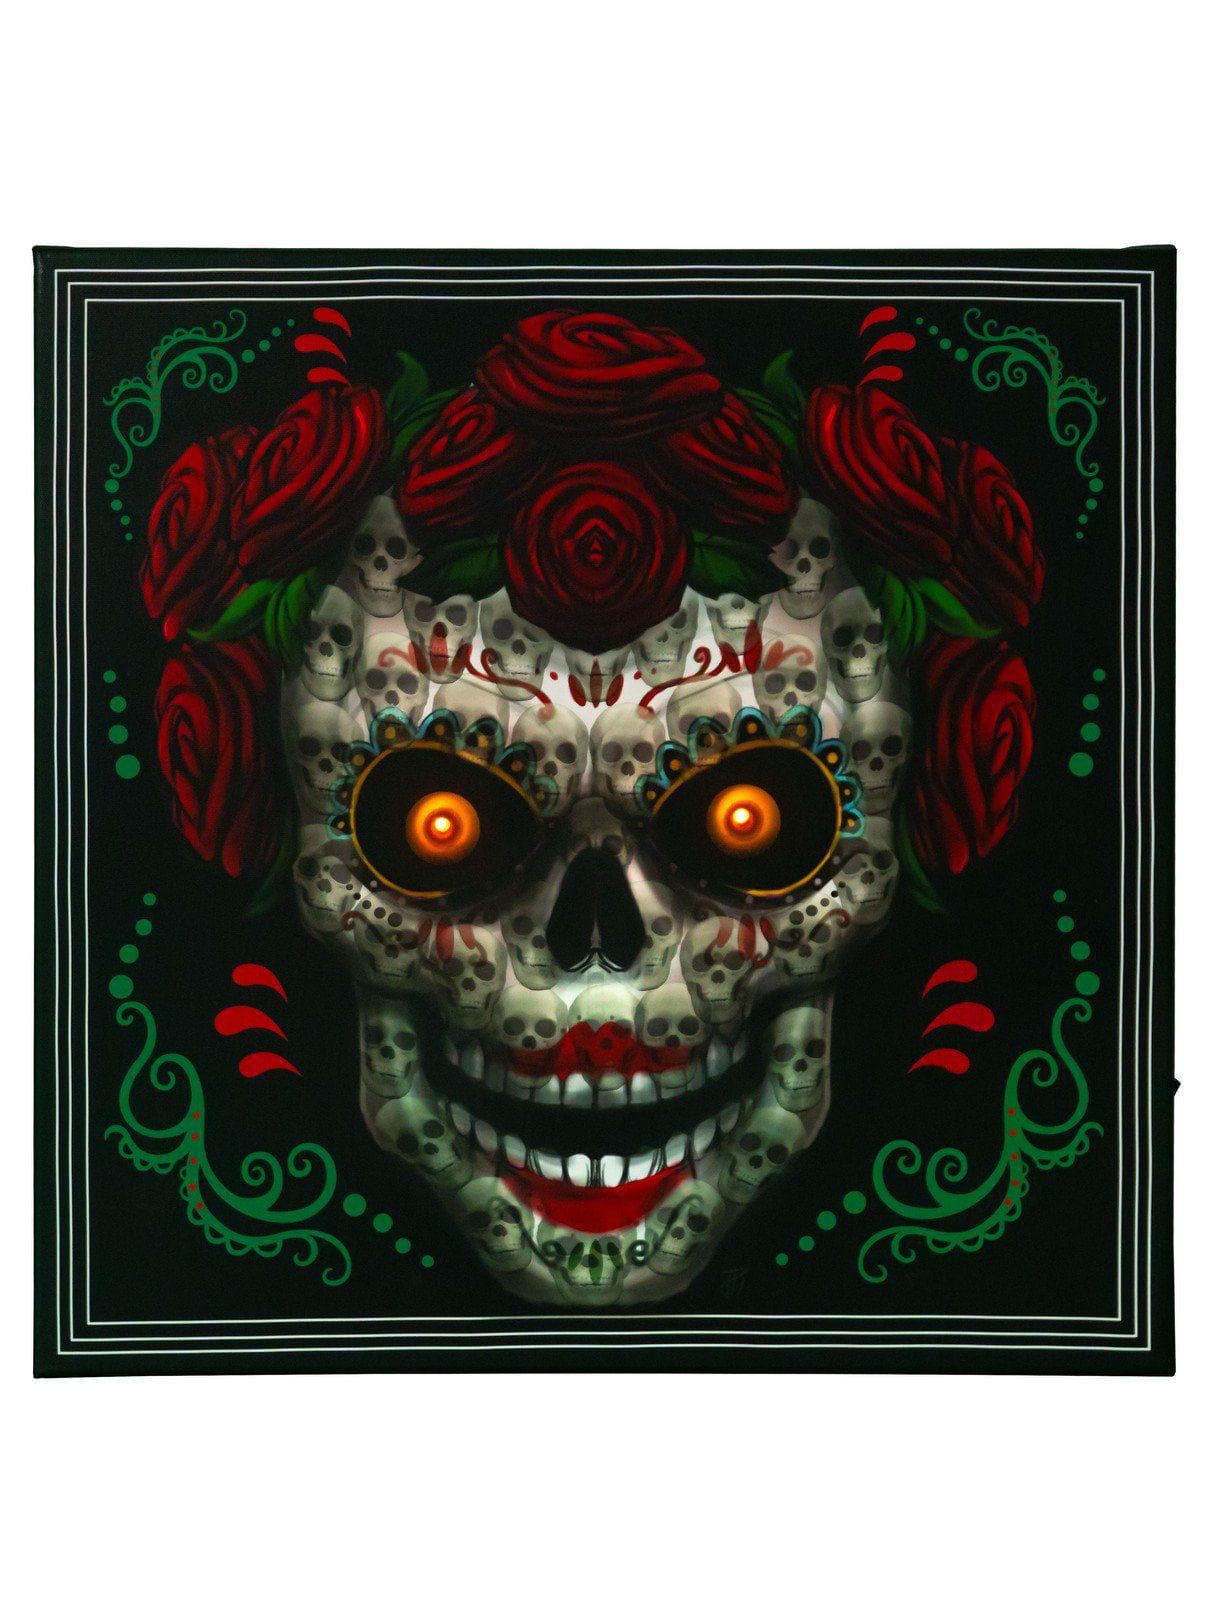 Wall Art Day Of The Dead - costumes.com